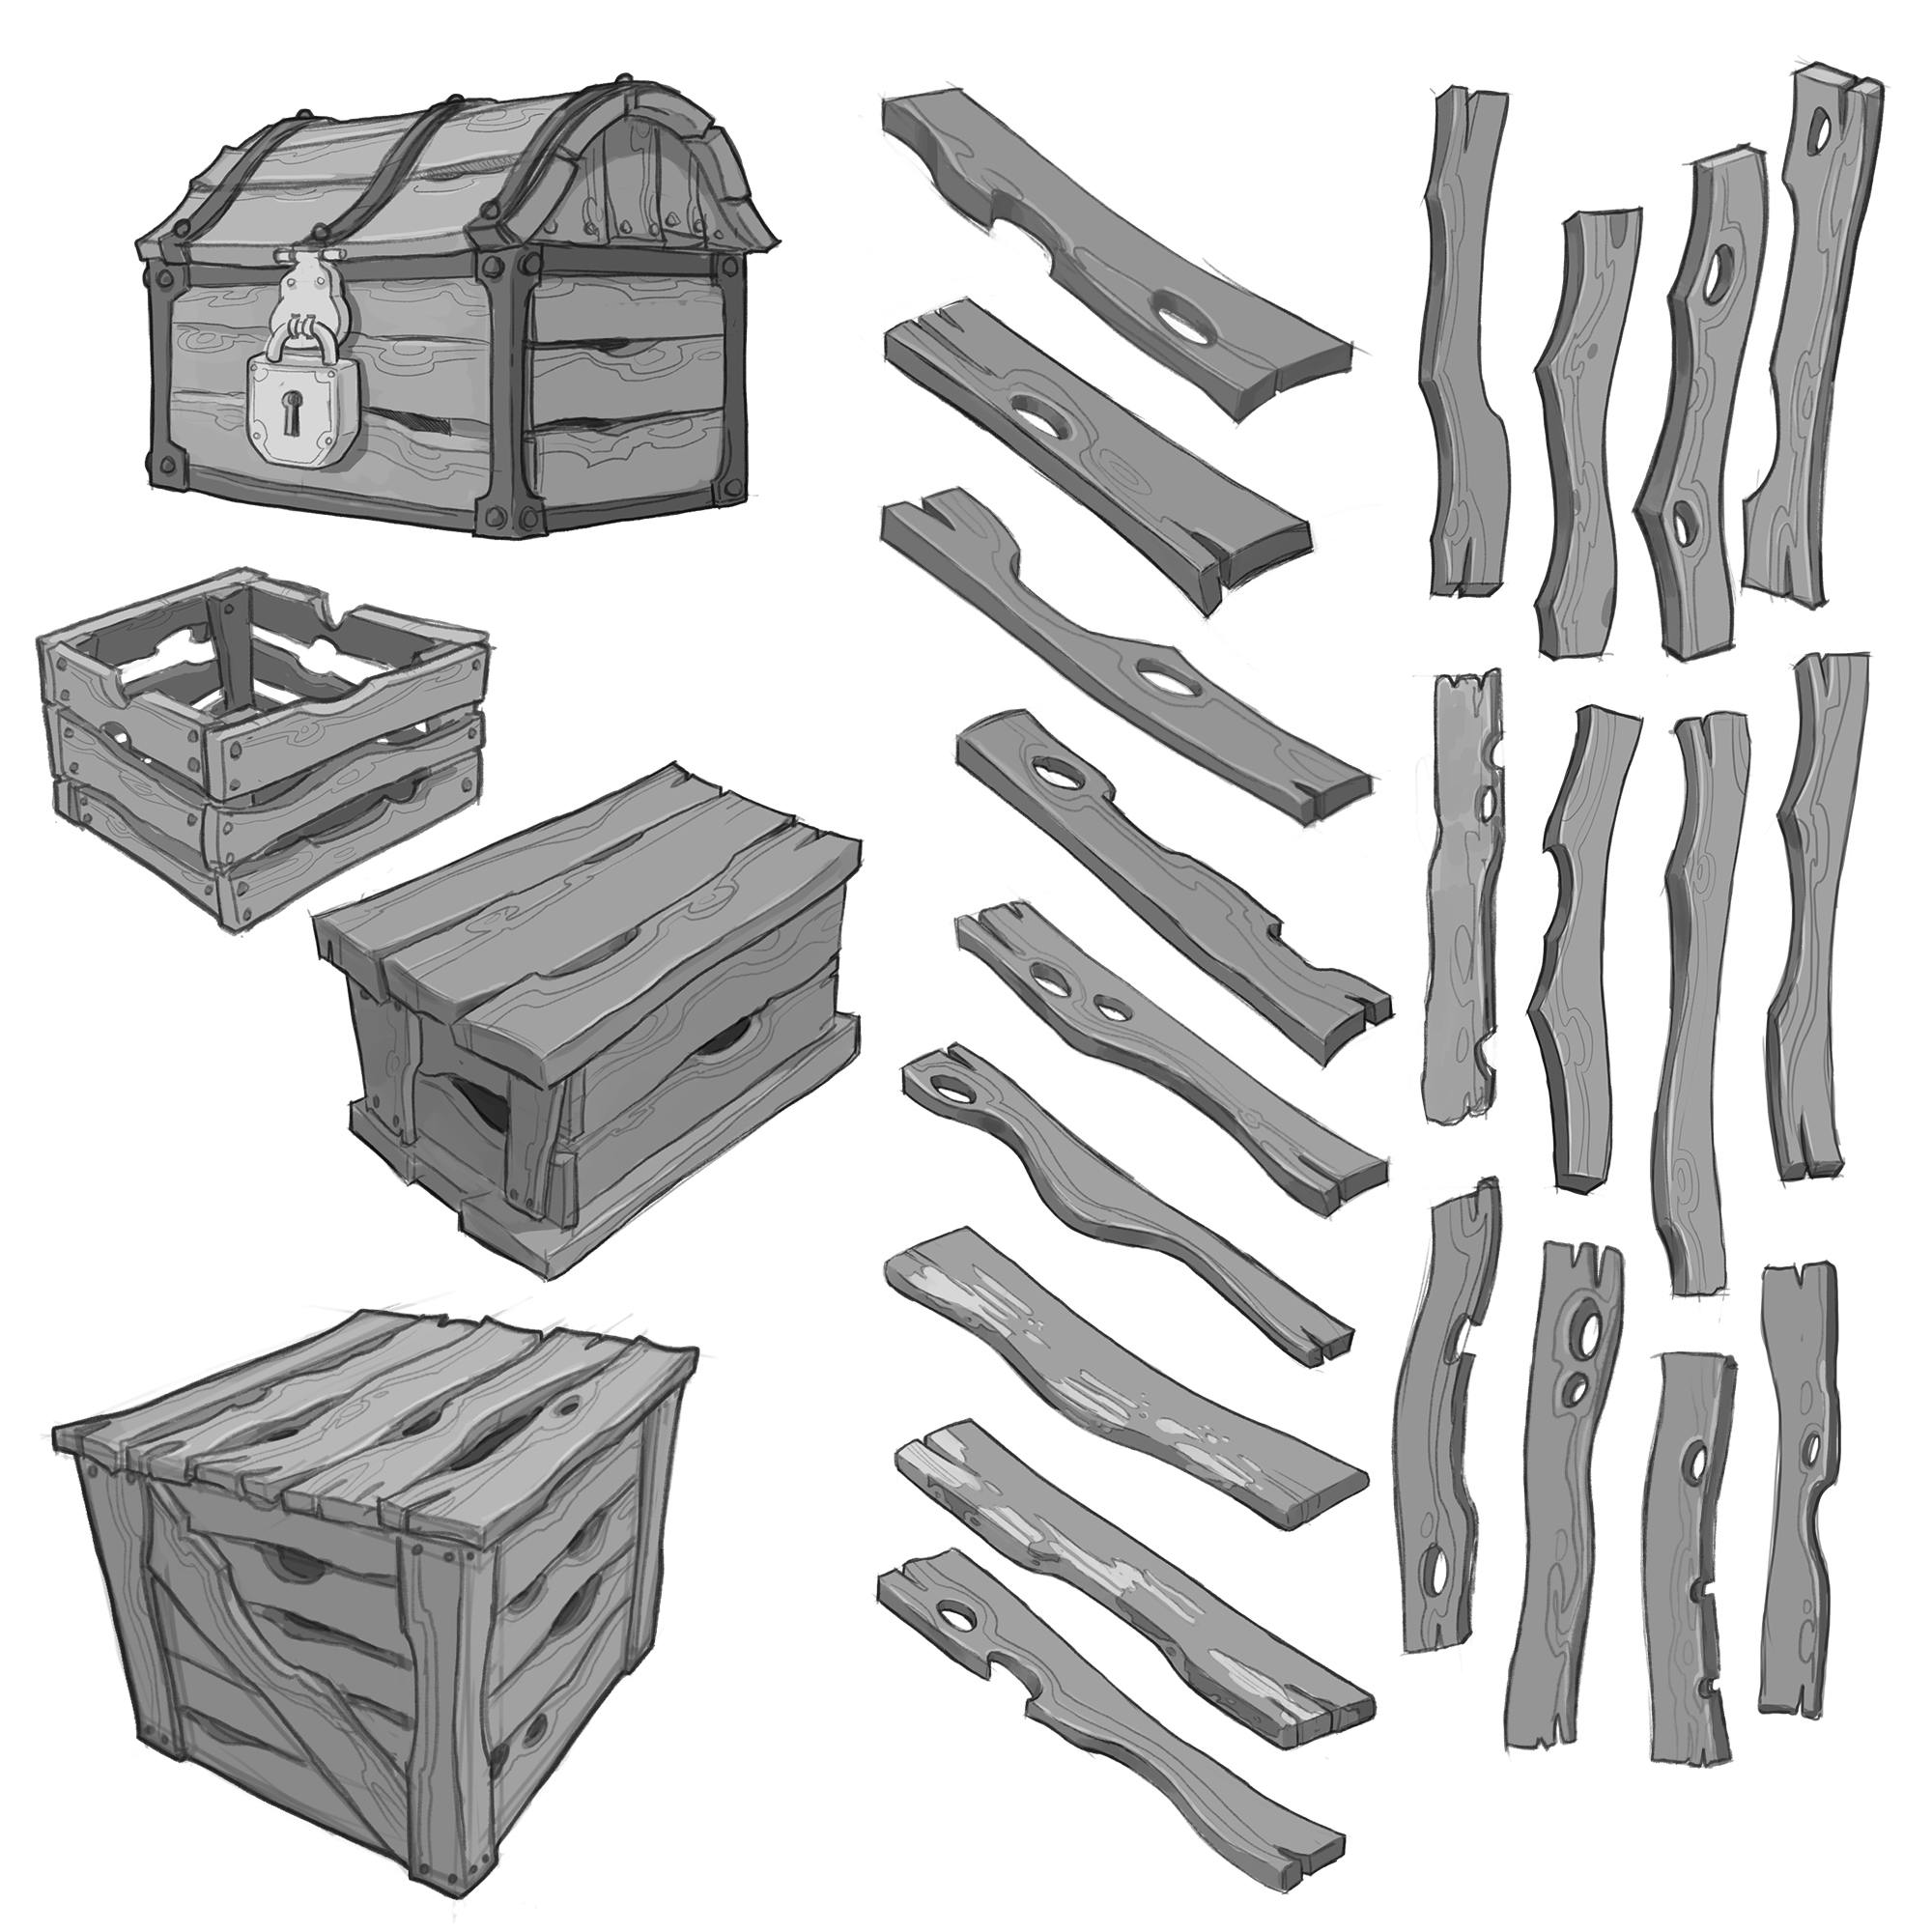 Concept sketches of wooden containers